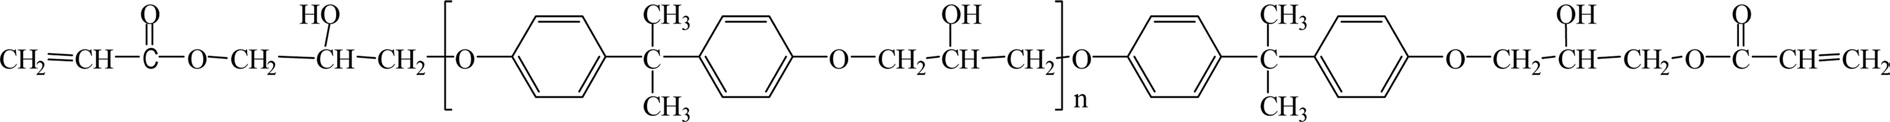 Chemical structure of bisphenol-A epoxy vinyl ester.